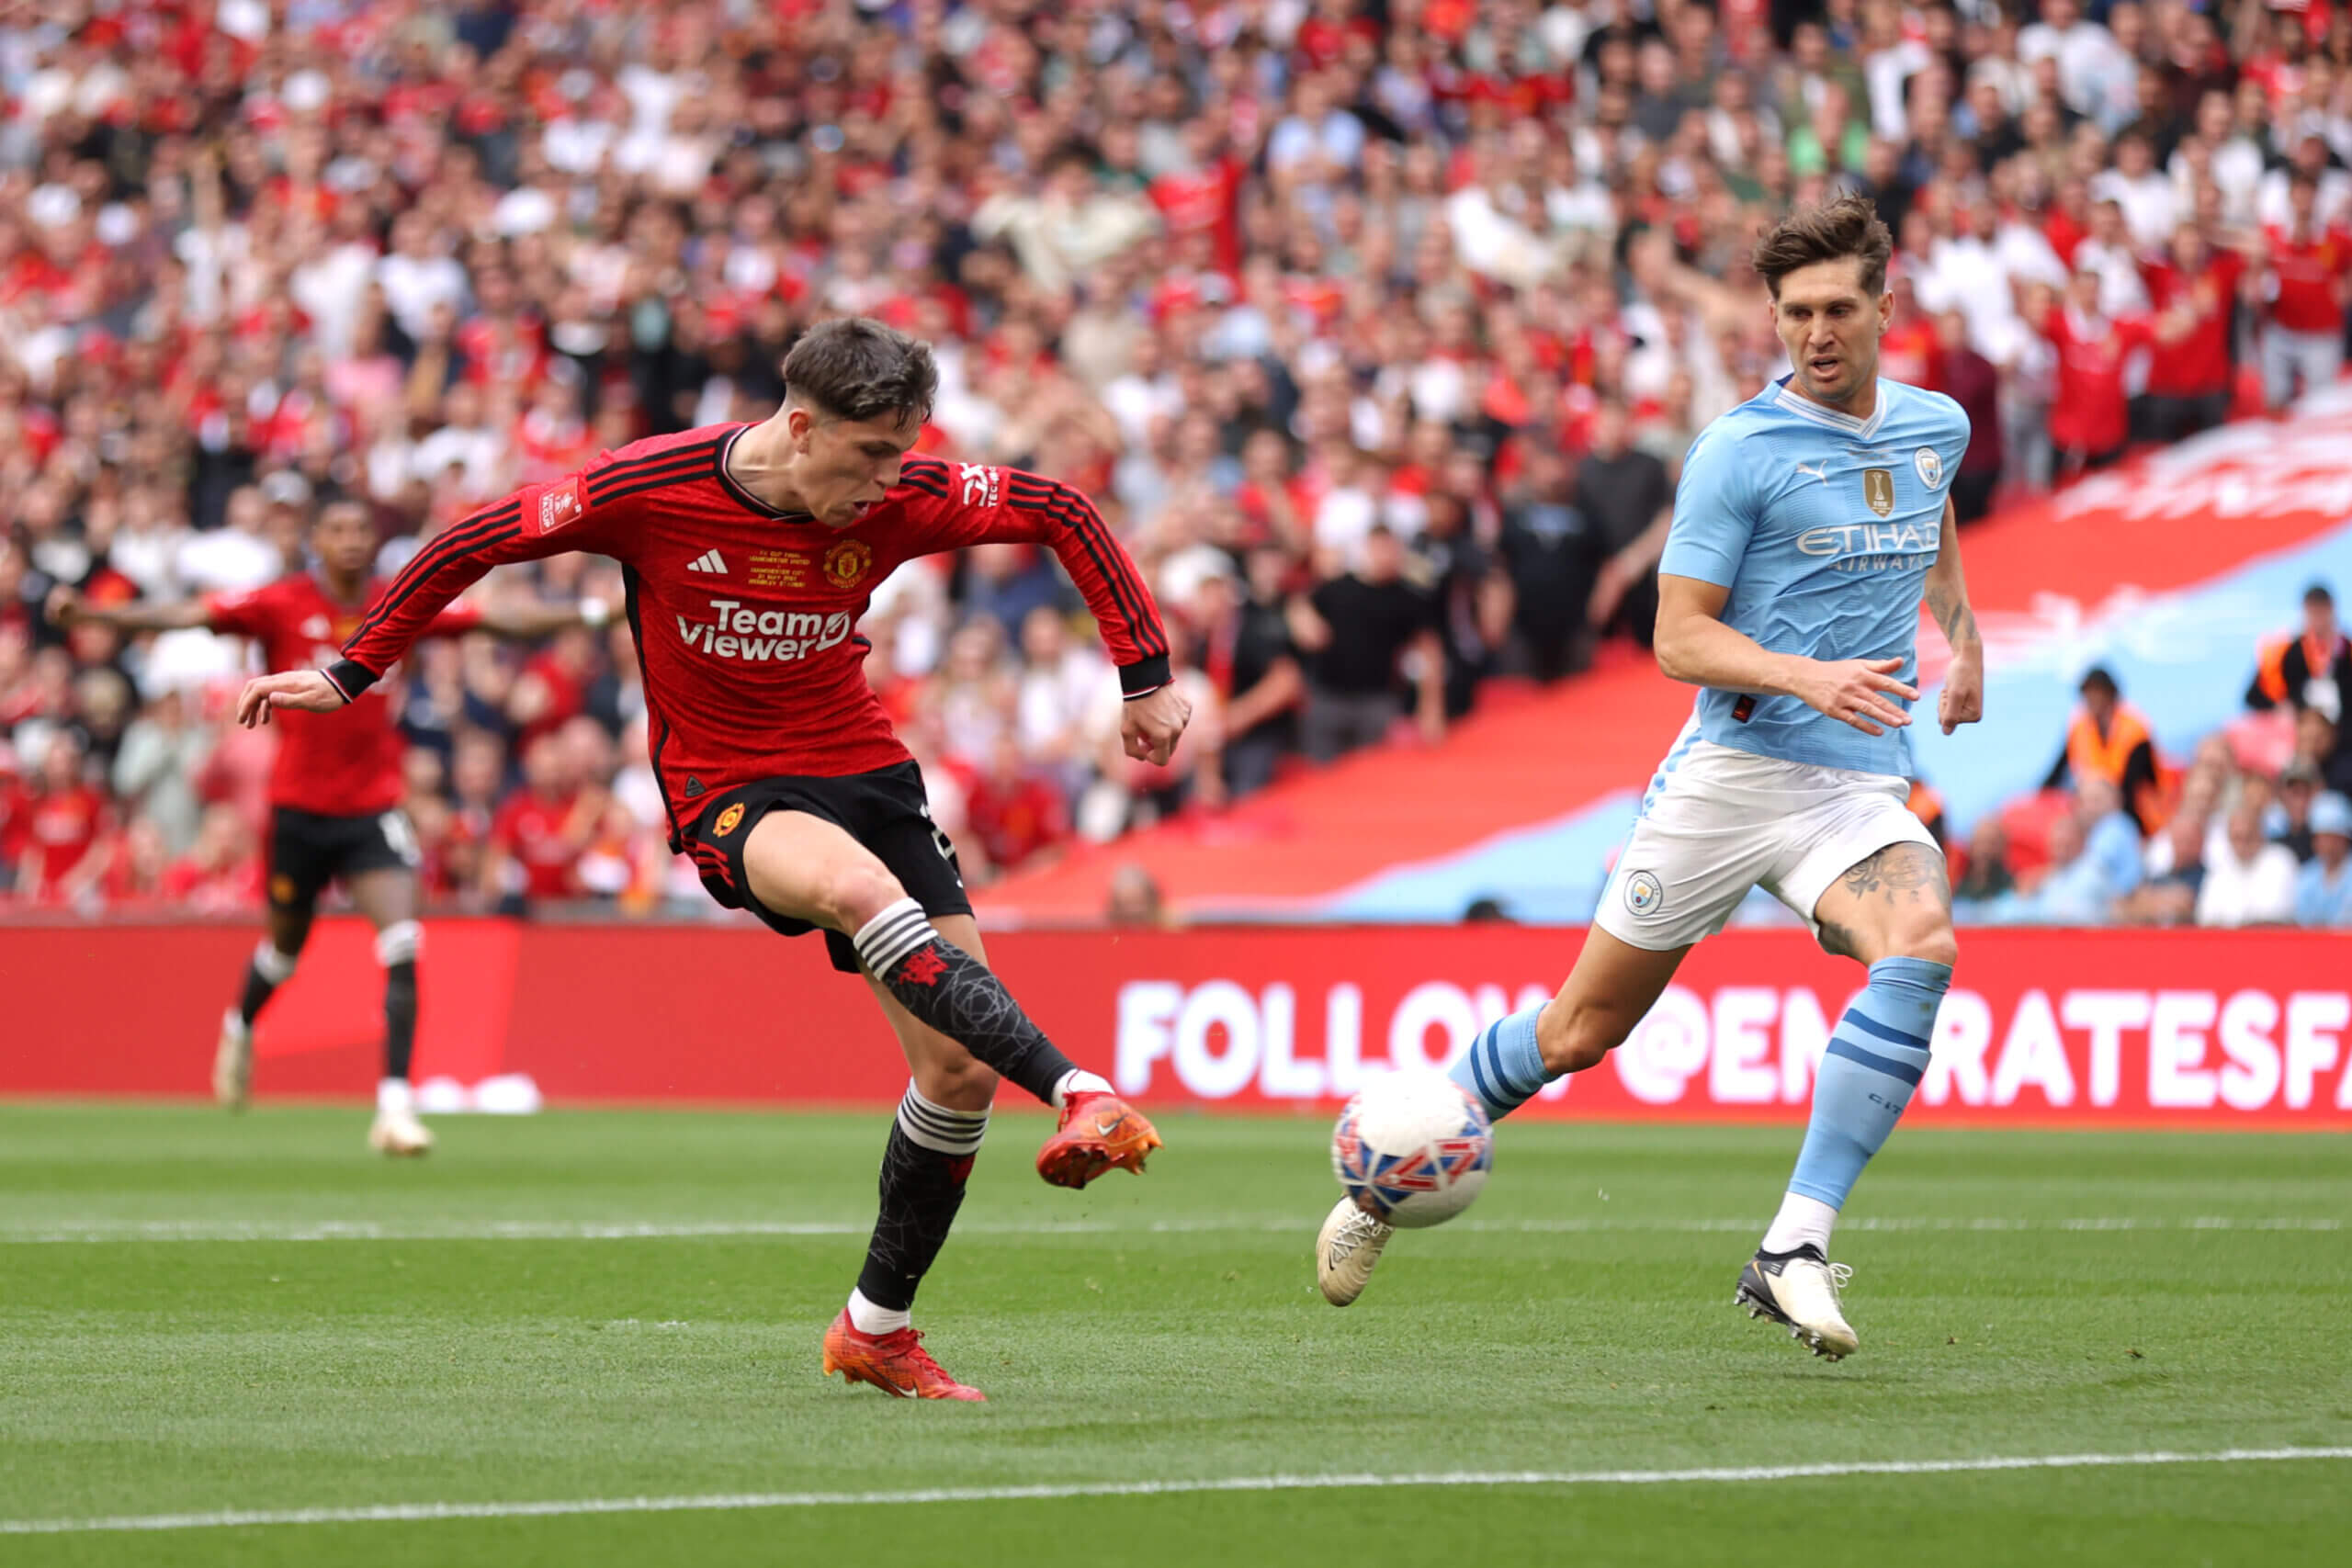 Manchester United defeated Manchester City in Saturday's FA Cup final (Getty Images)